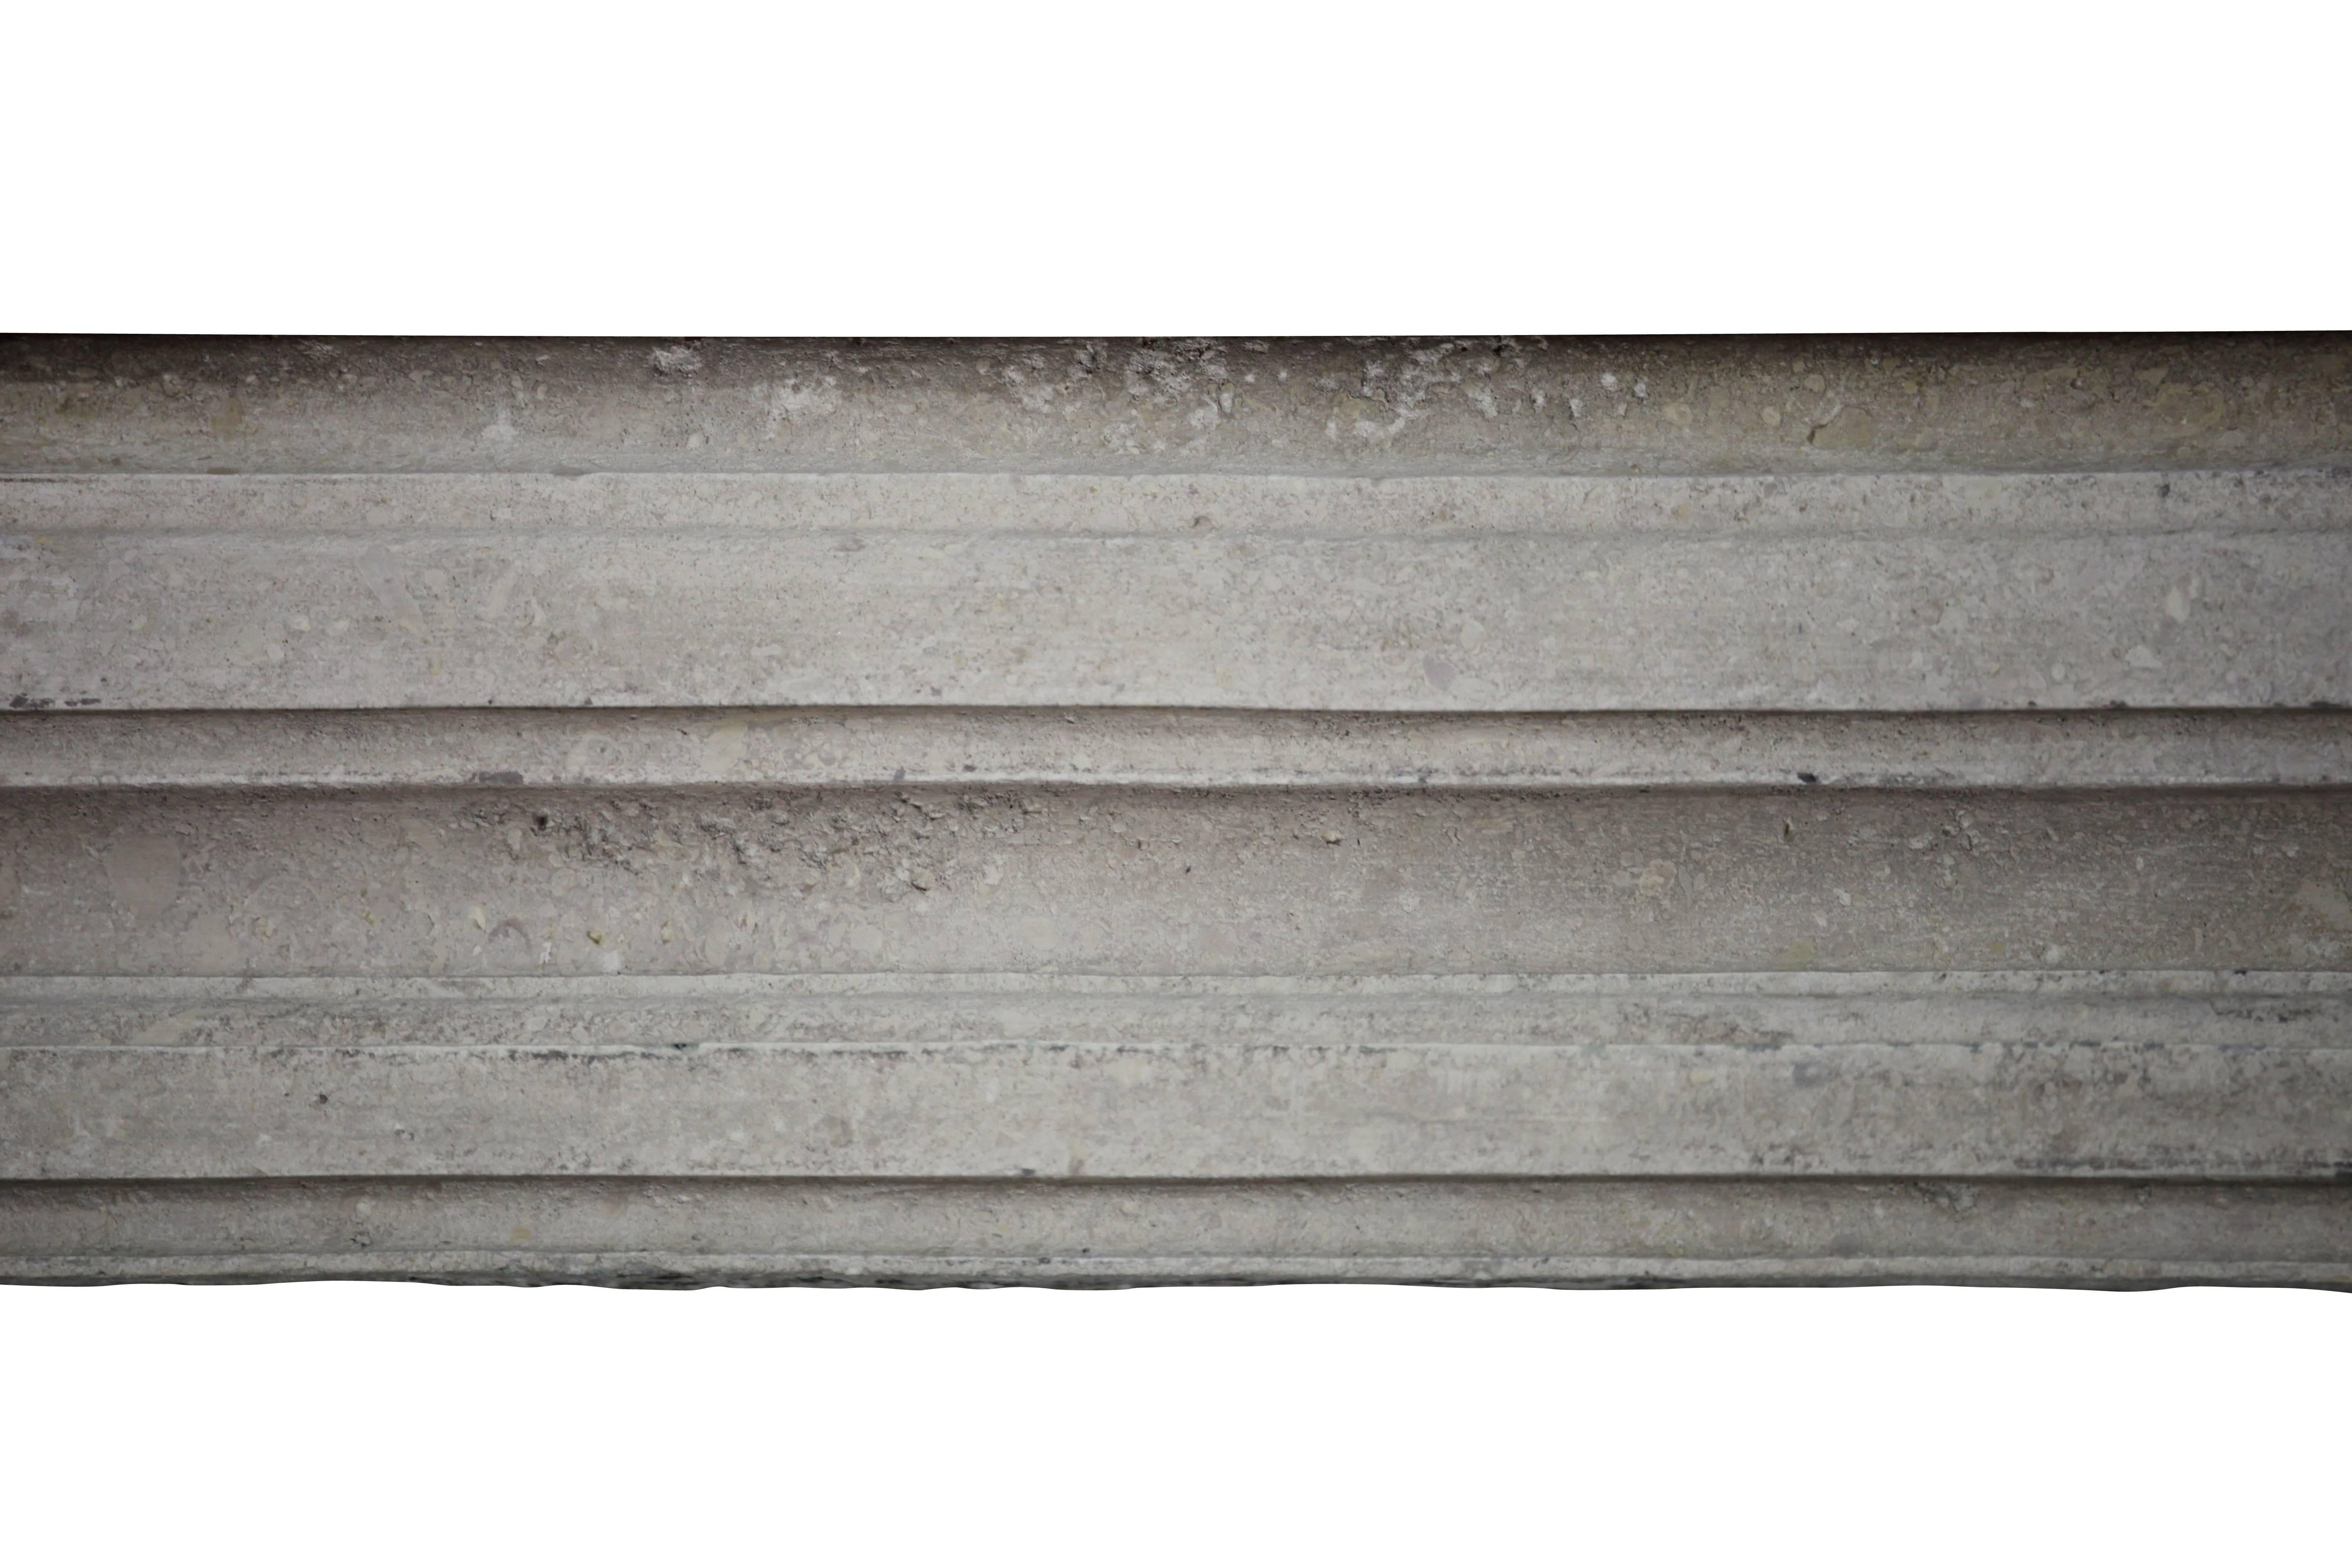 This limestone French country mantel has a diamond point detail on both sides of its front. A little remains of the original patina is an extra however can be removed. The limestone is also from the harder kind and when waxed will reflect light of